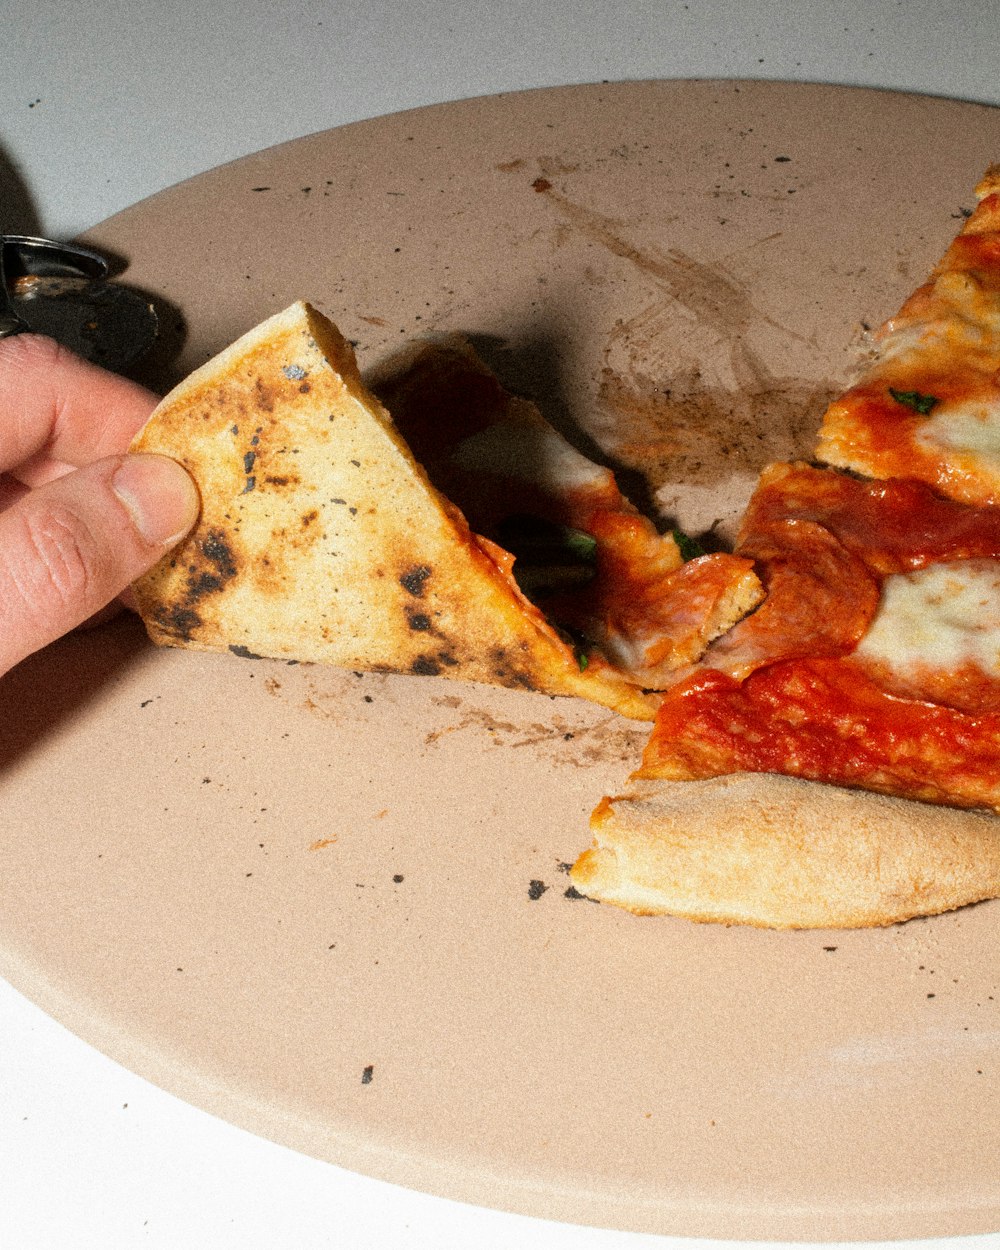 a hand is picking up a slice of pizza from a plate